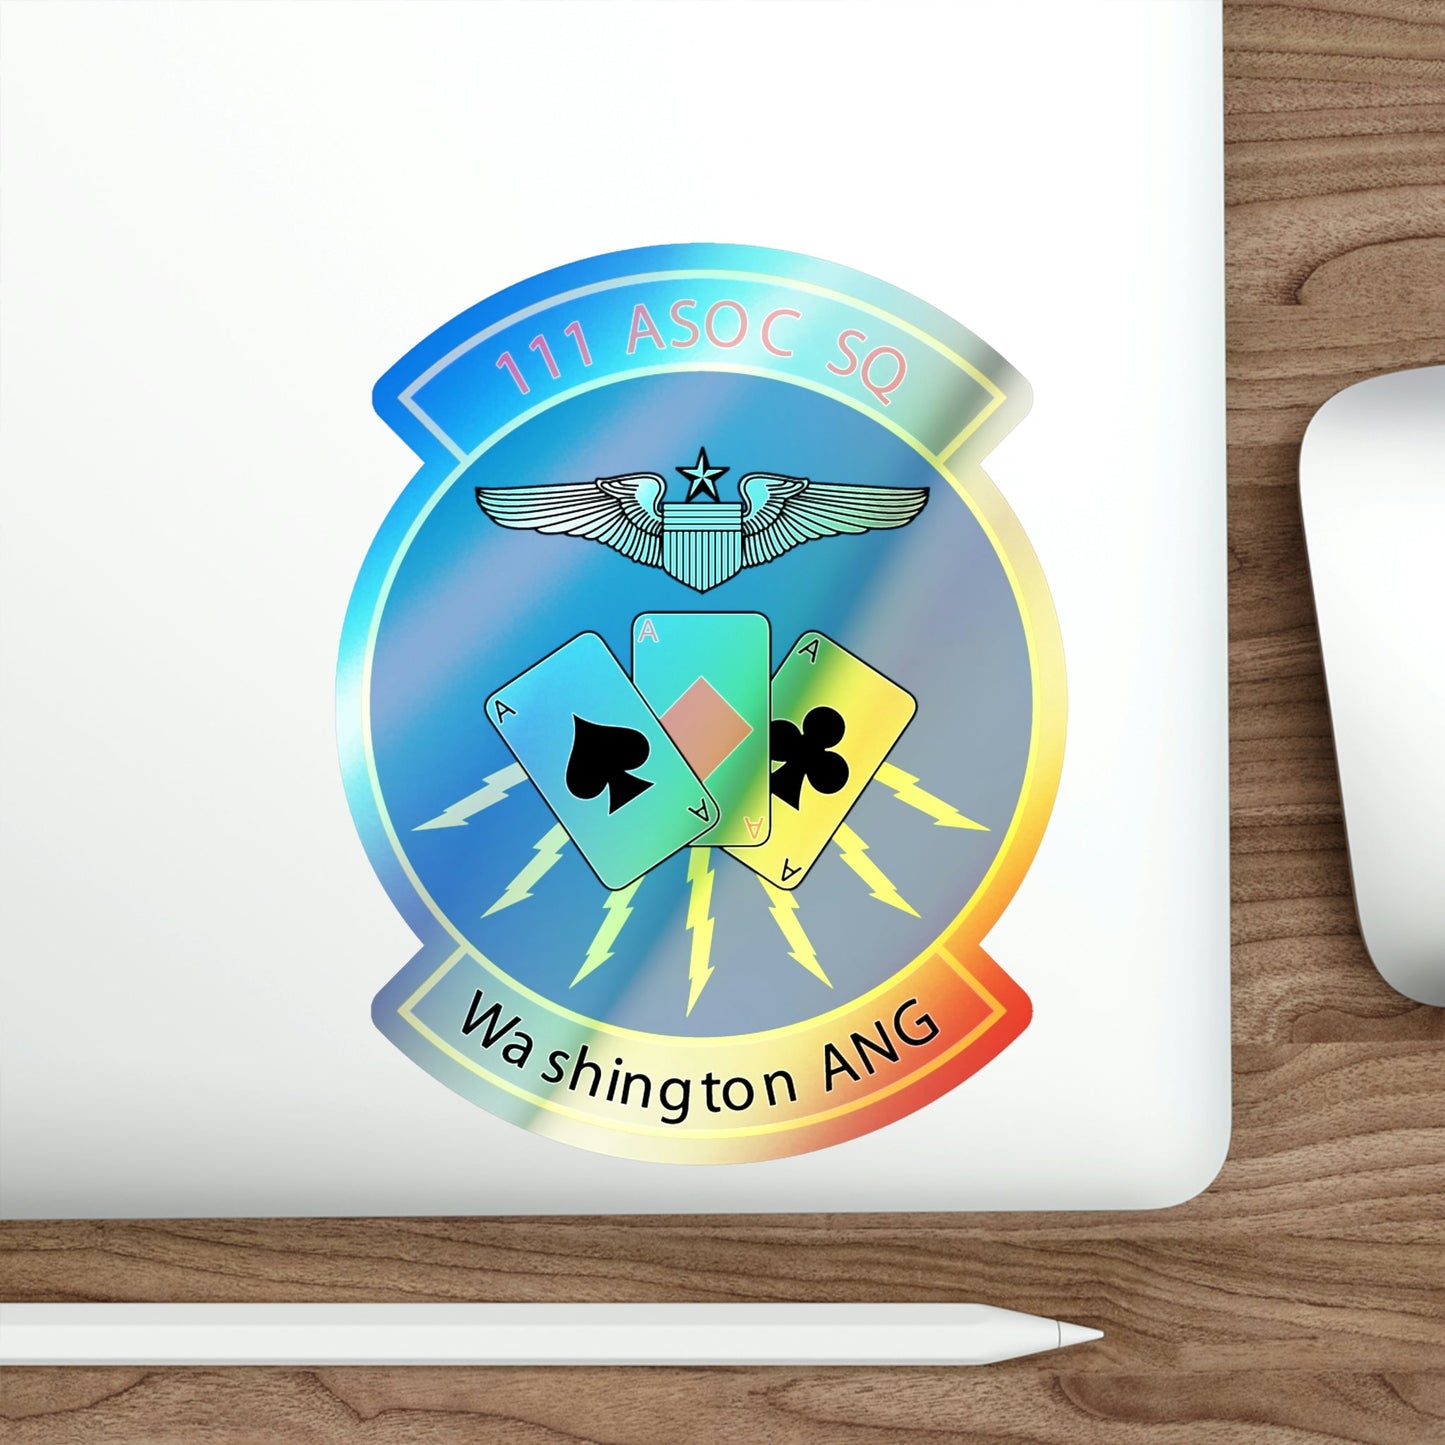 111 ASOC Sq Washington ANG (U.S. Air Force) Holographic STICKER Die-Cut Vinyl Decal-The Sticker Space